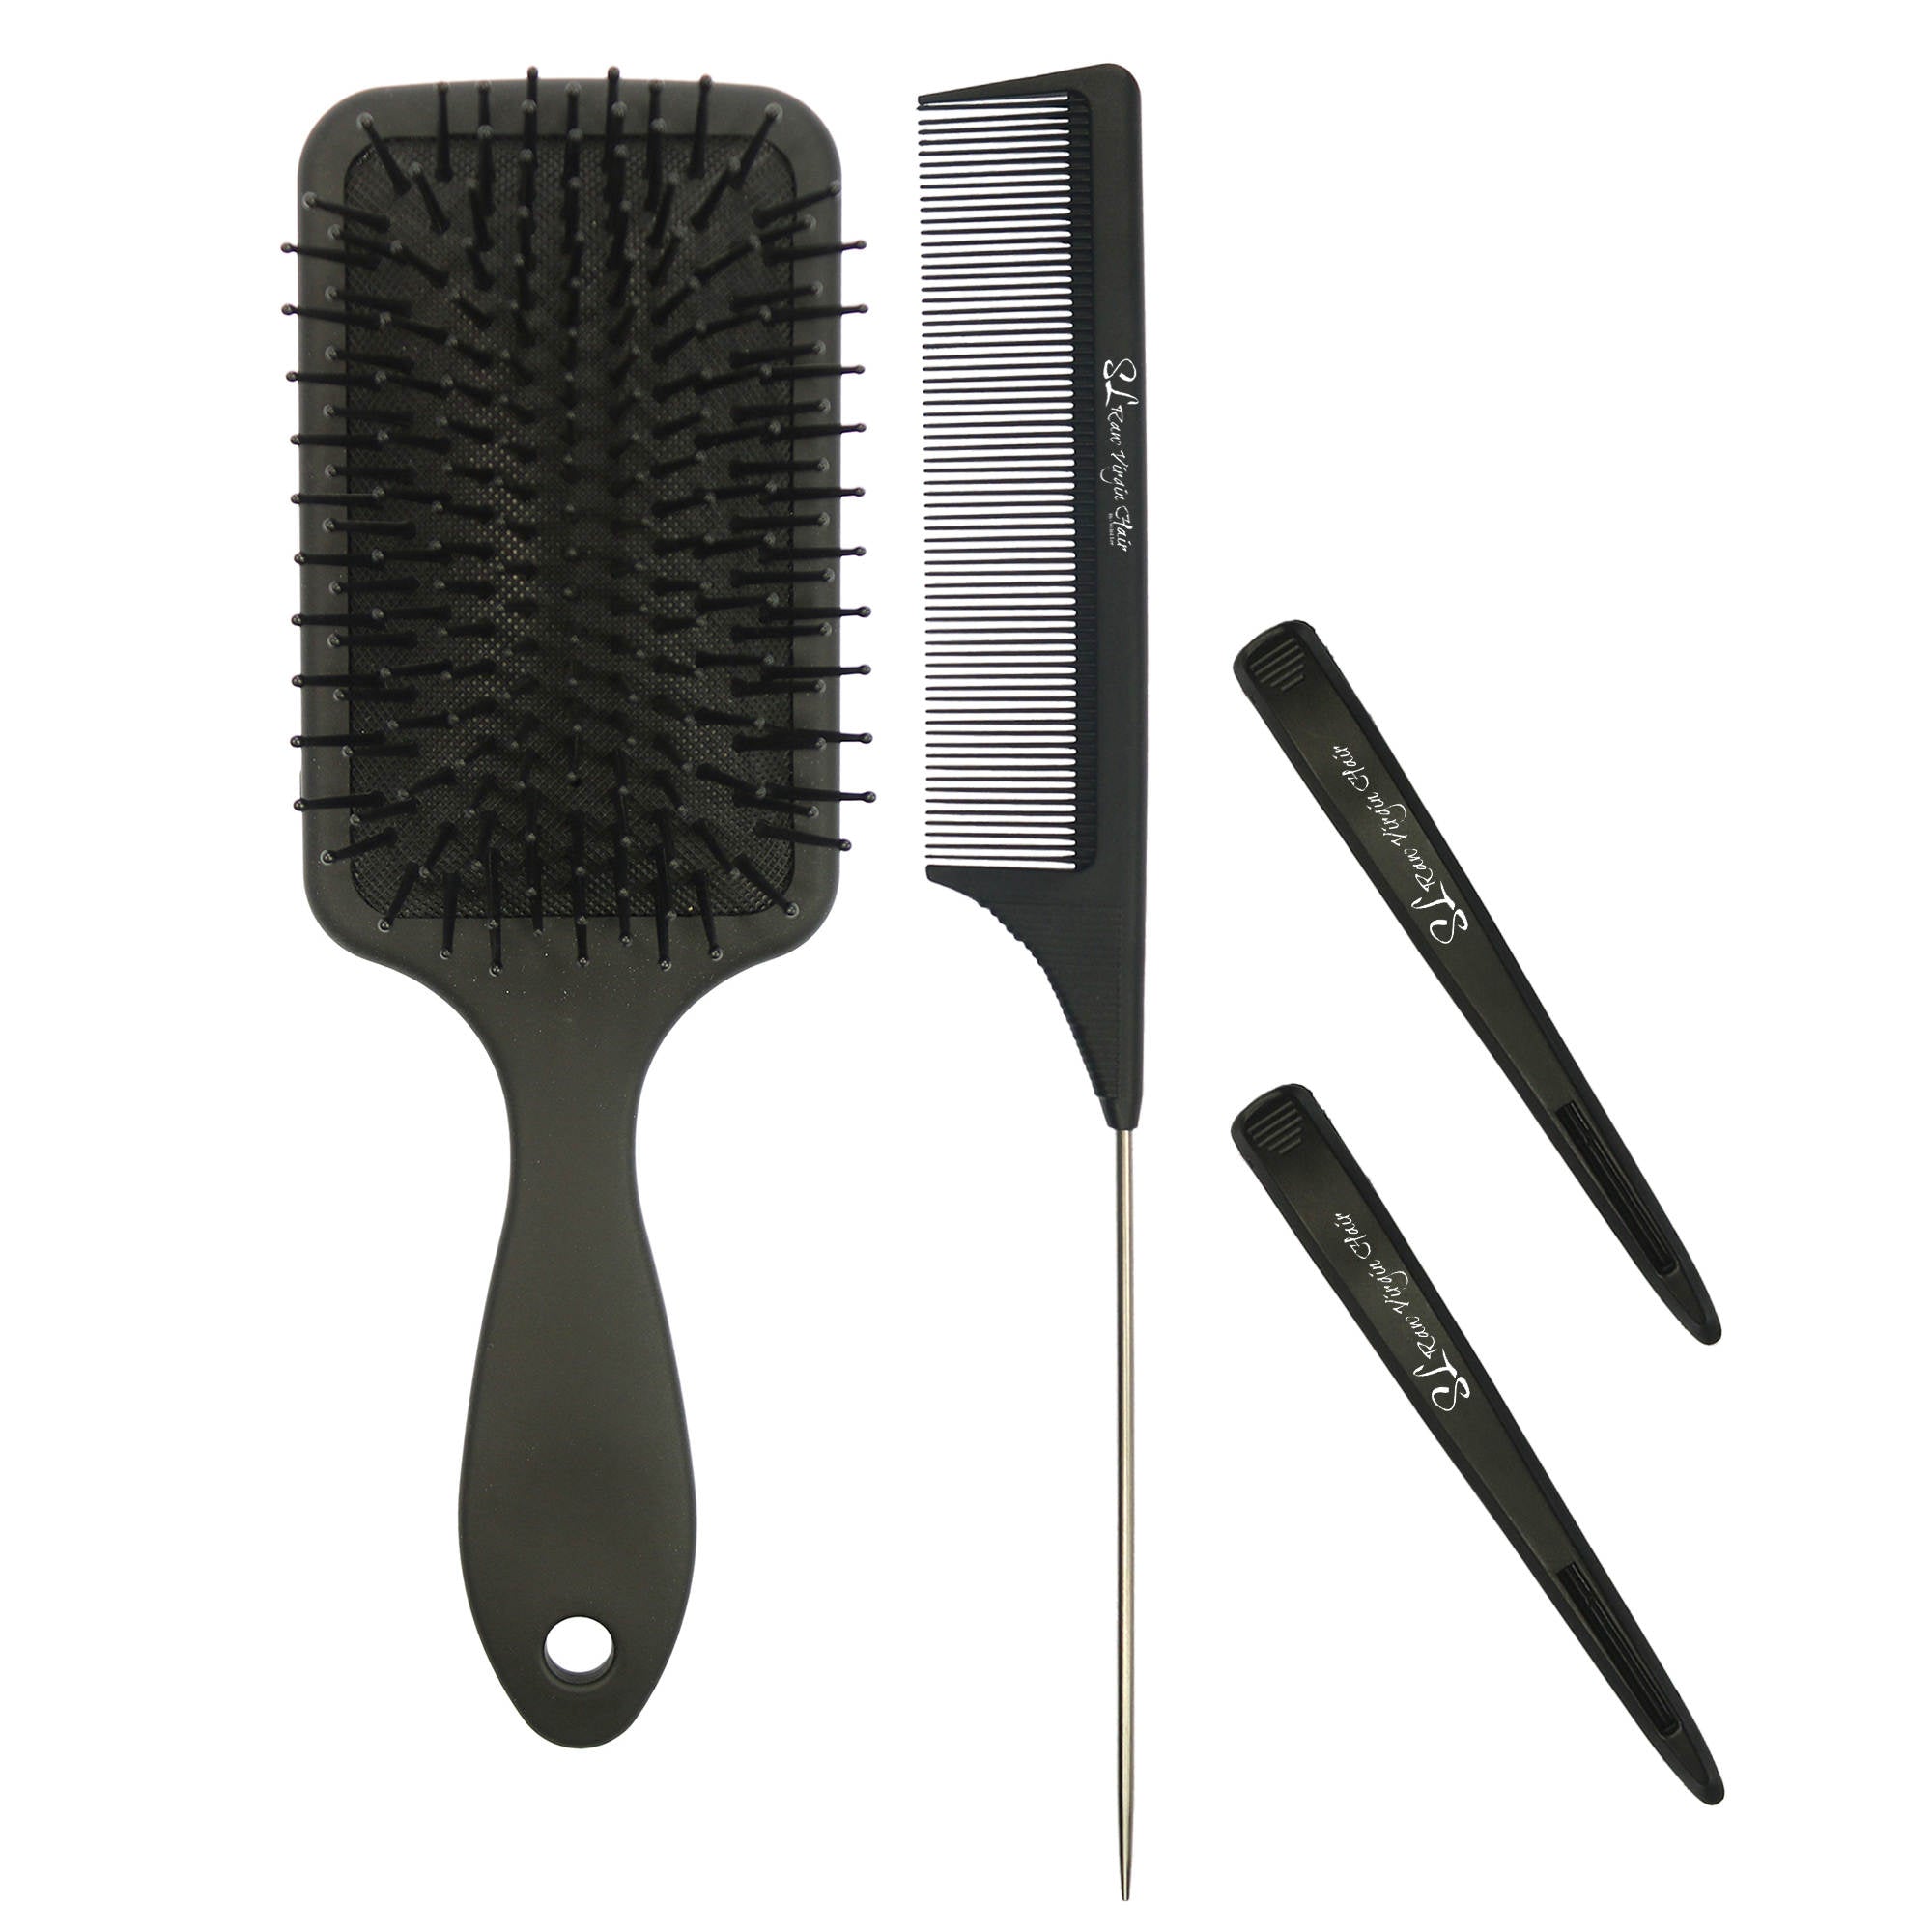 4 piece Paddle Brush Heat Resistant Com with clips. 